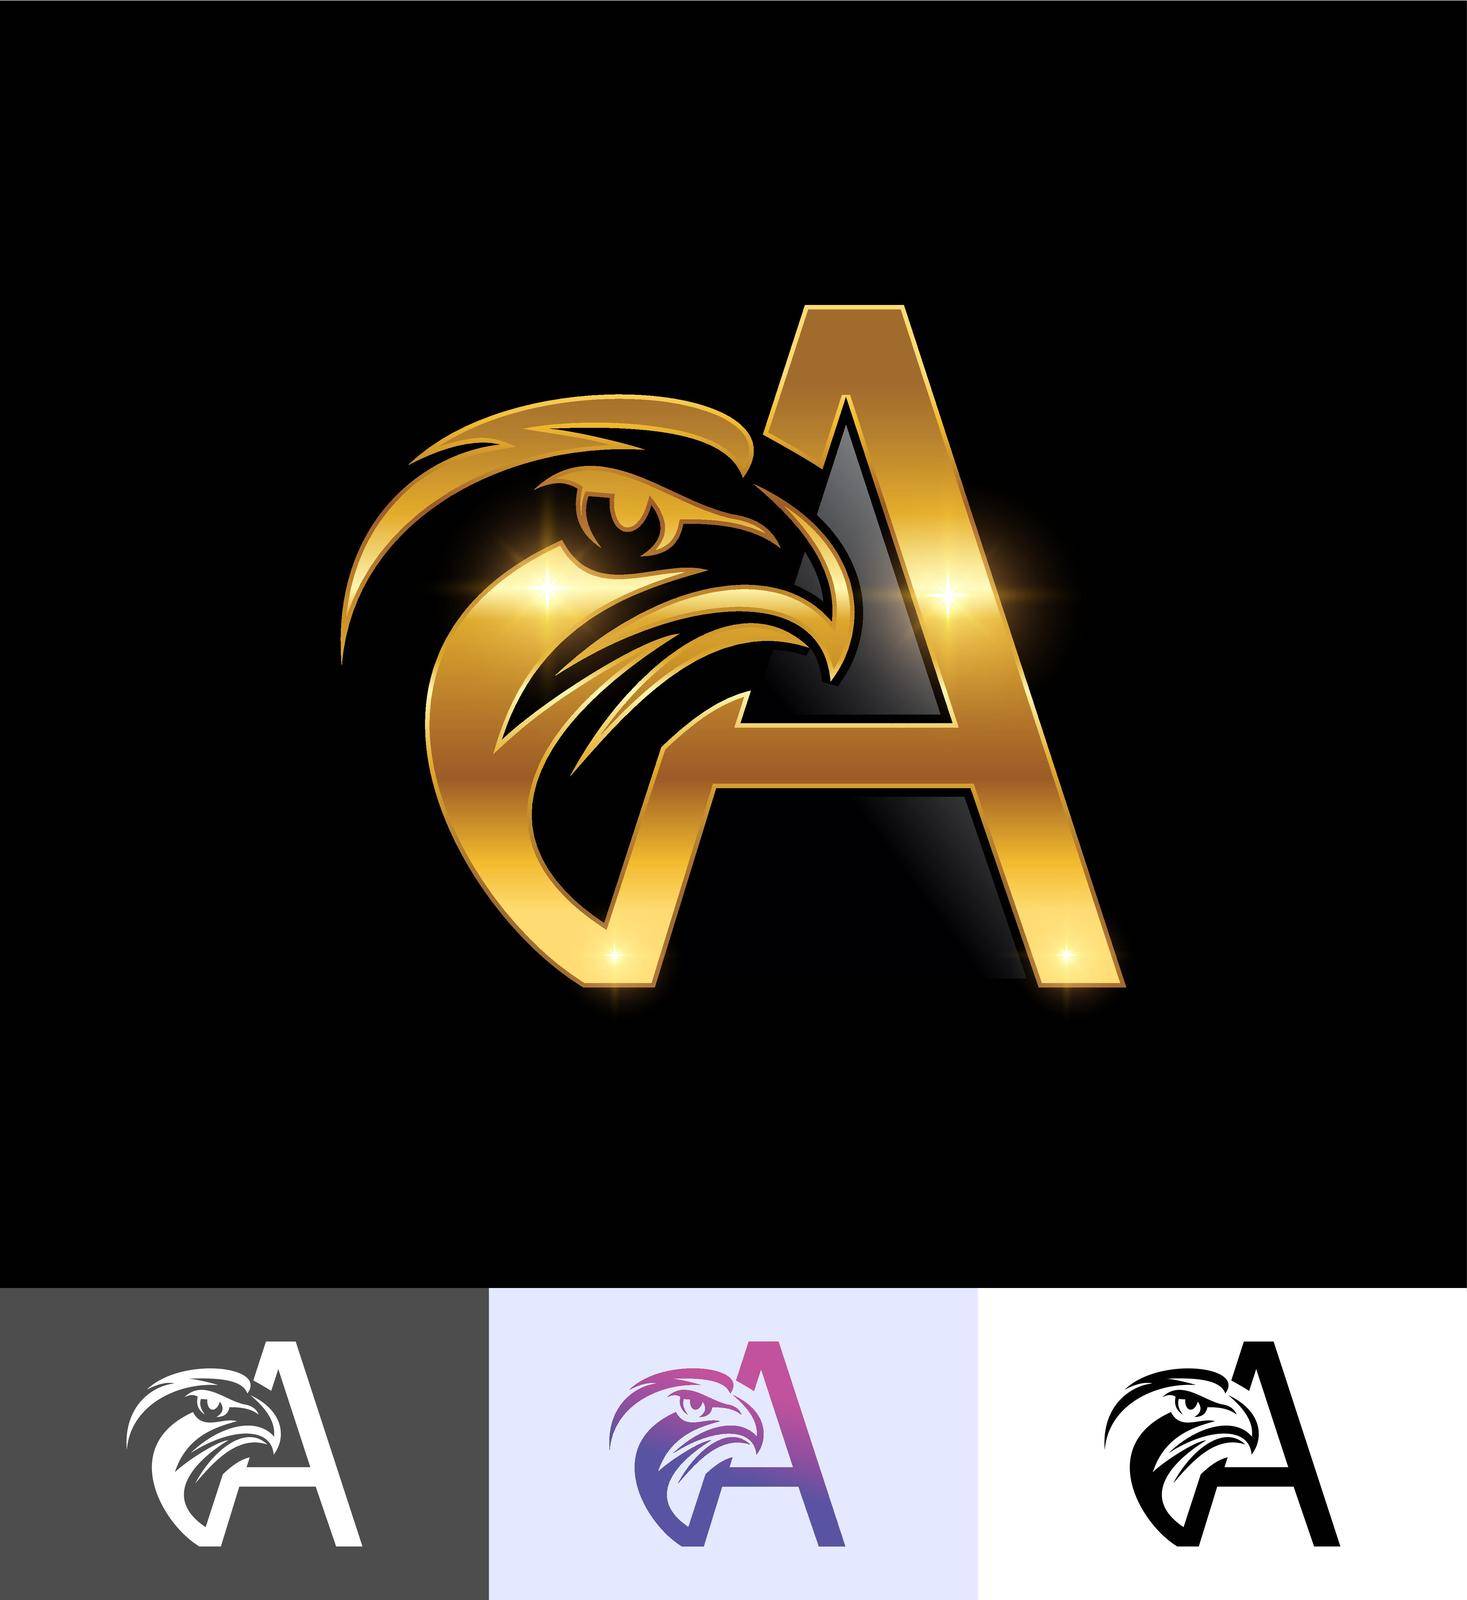 Golden Eagle Monogram Initial Letter A by Up2date